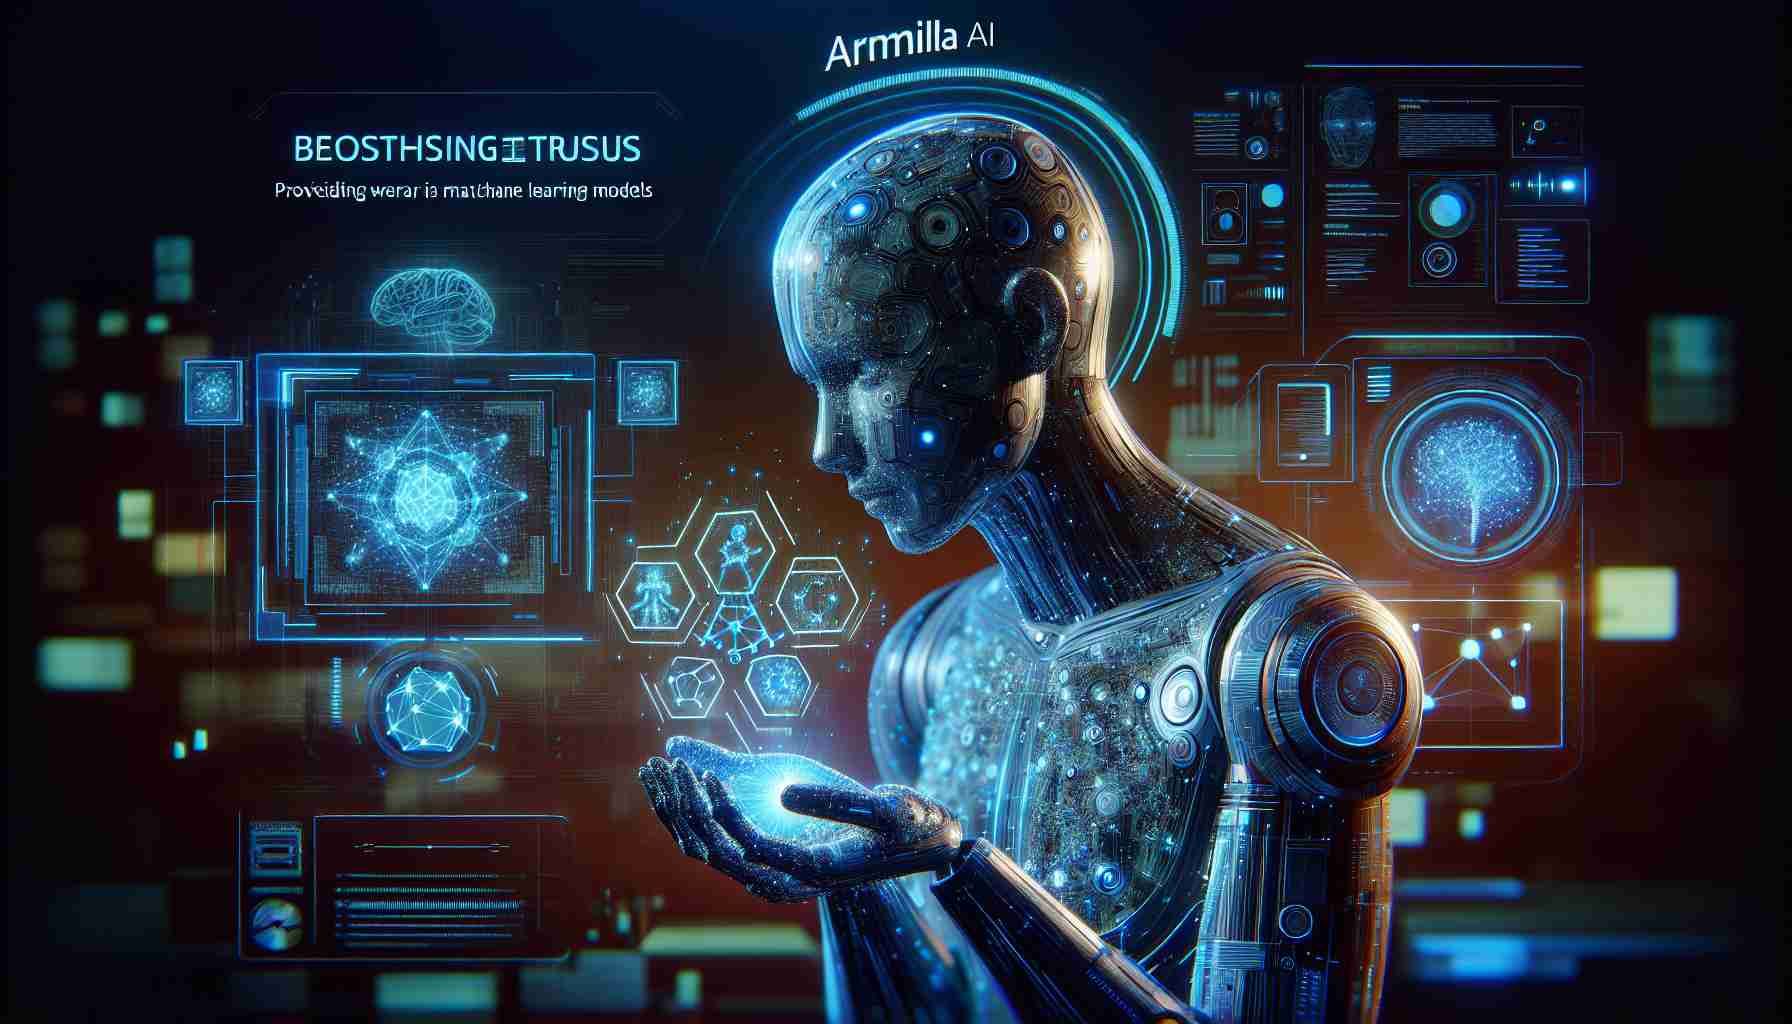 Armilla AI Offers Warranties For Third-Party AI Models To Boost Corporate Confidence